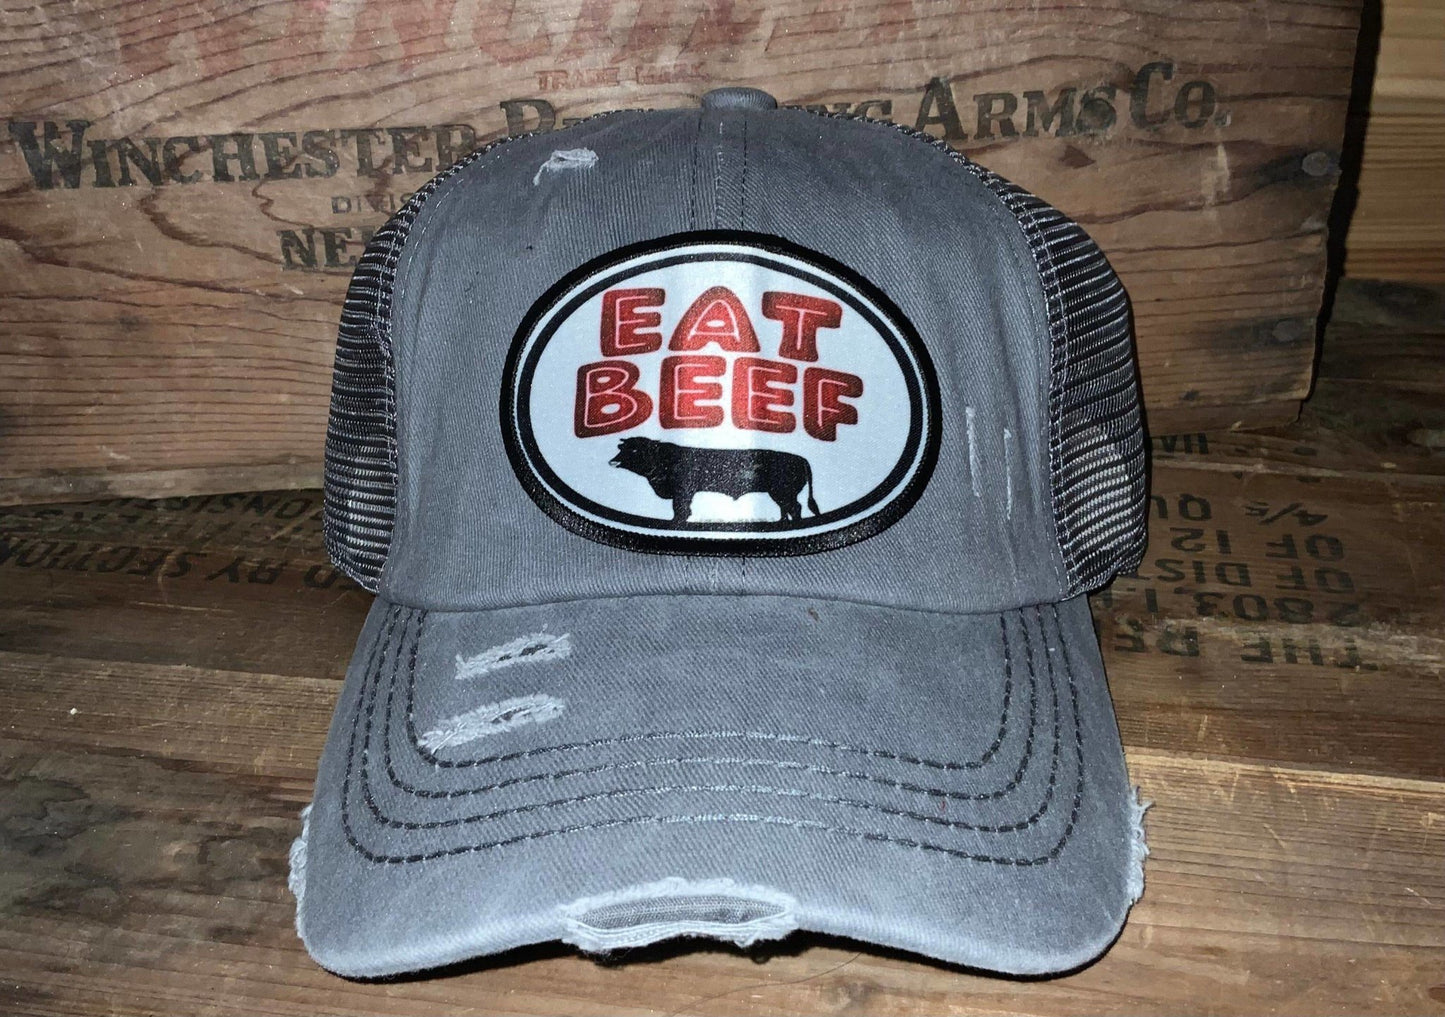 Eat Beef (women’s) - CountryFide Custom Accessories and Outdoors